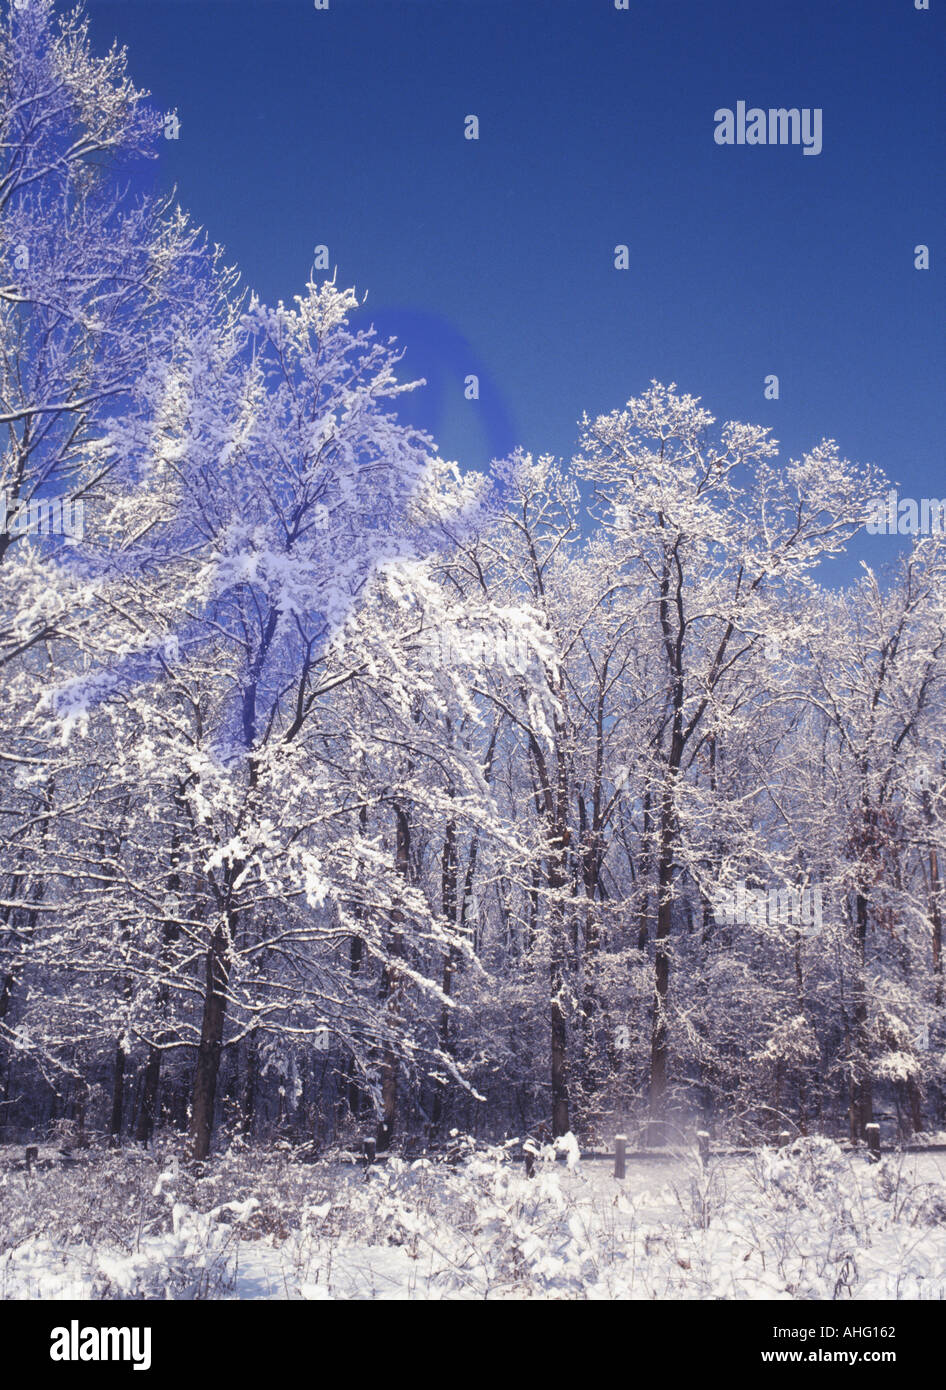 Trees And Bright Blue Sky In SnowyWinter Scene Stock Photo